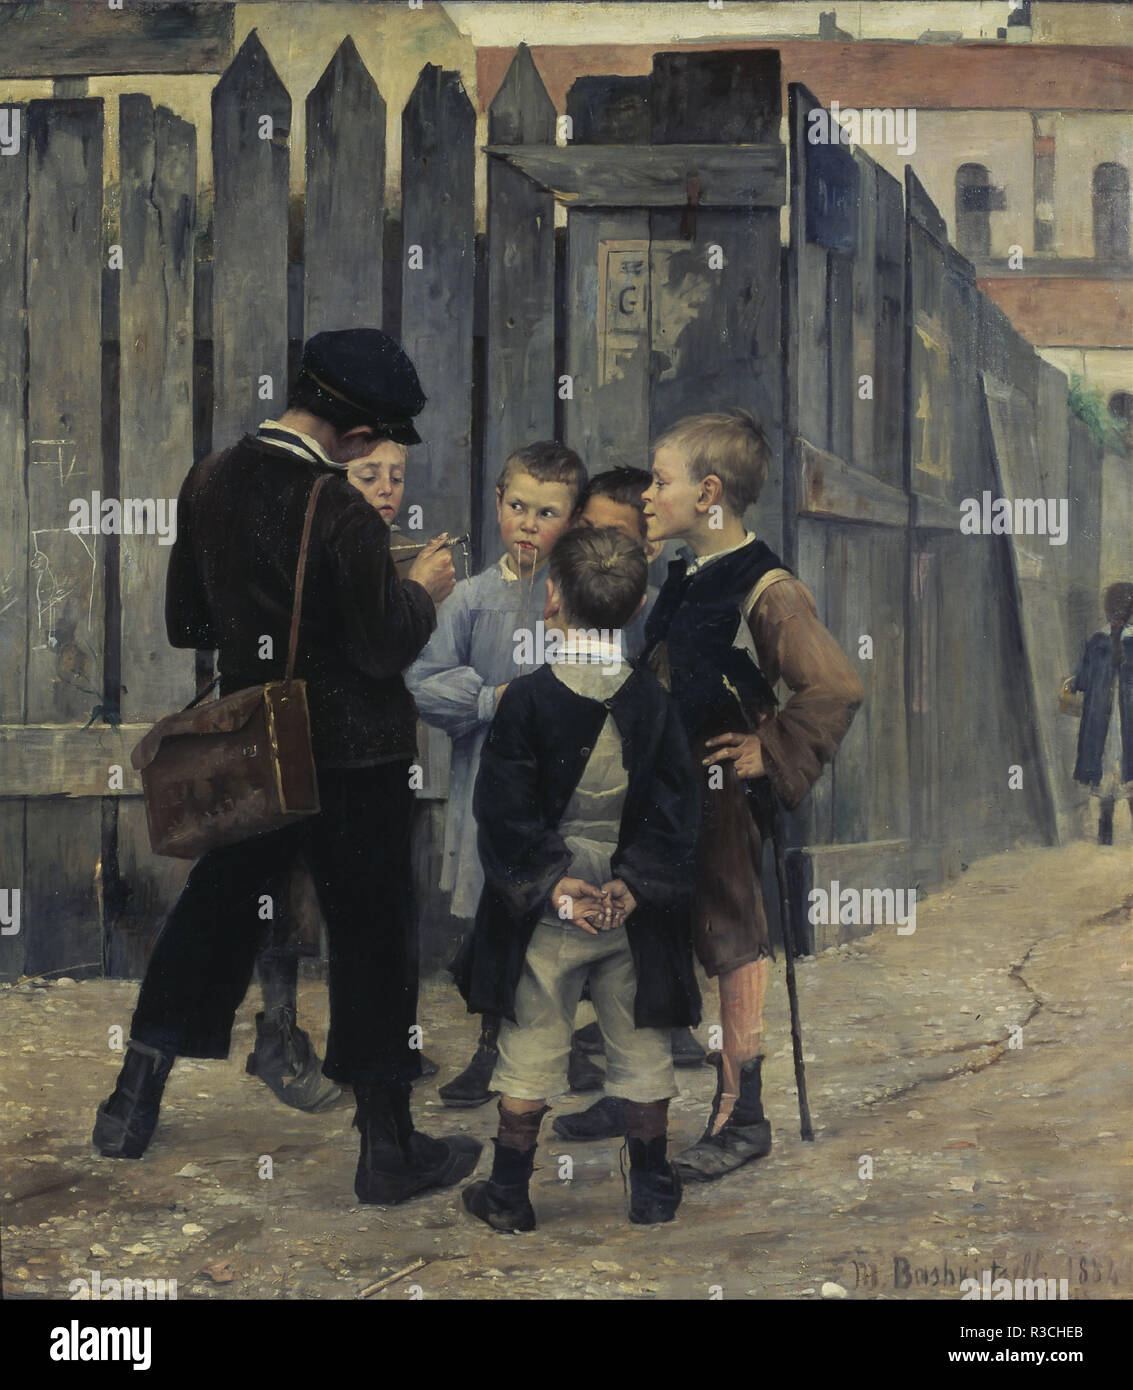 A meeting. Date/Period: 1884. Painting. Oil on canvas. Height: 1,930 mm (75.98 in); Width: 1,770 mm (69.68 in). Author: Marie Bashkirtseff. Baschkirtseva, Maria. Bashkirtseva, Maria Konstantinovna. Stock Photo